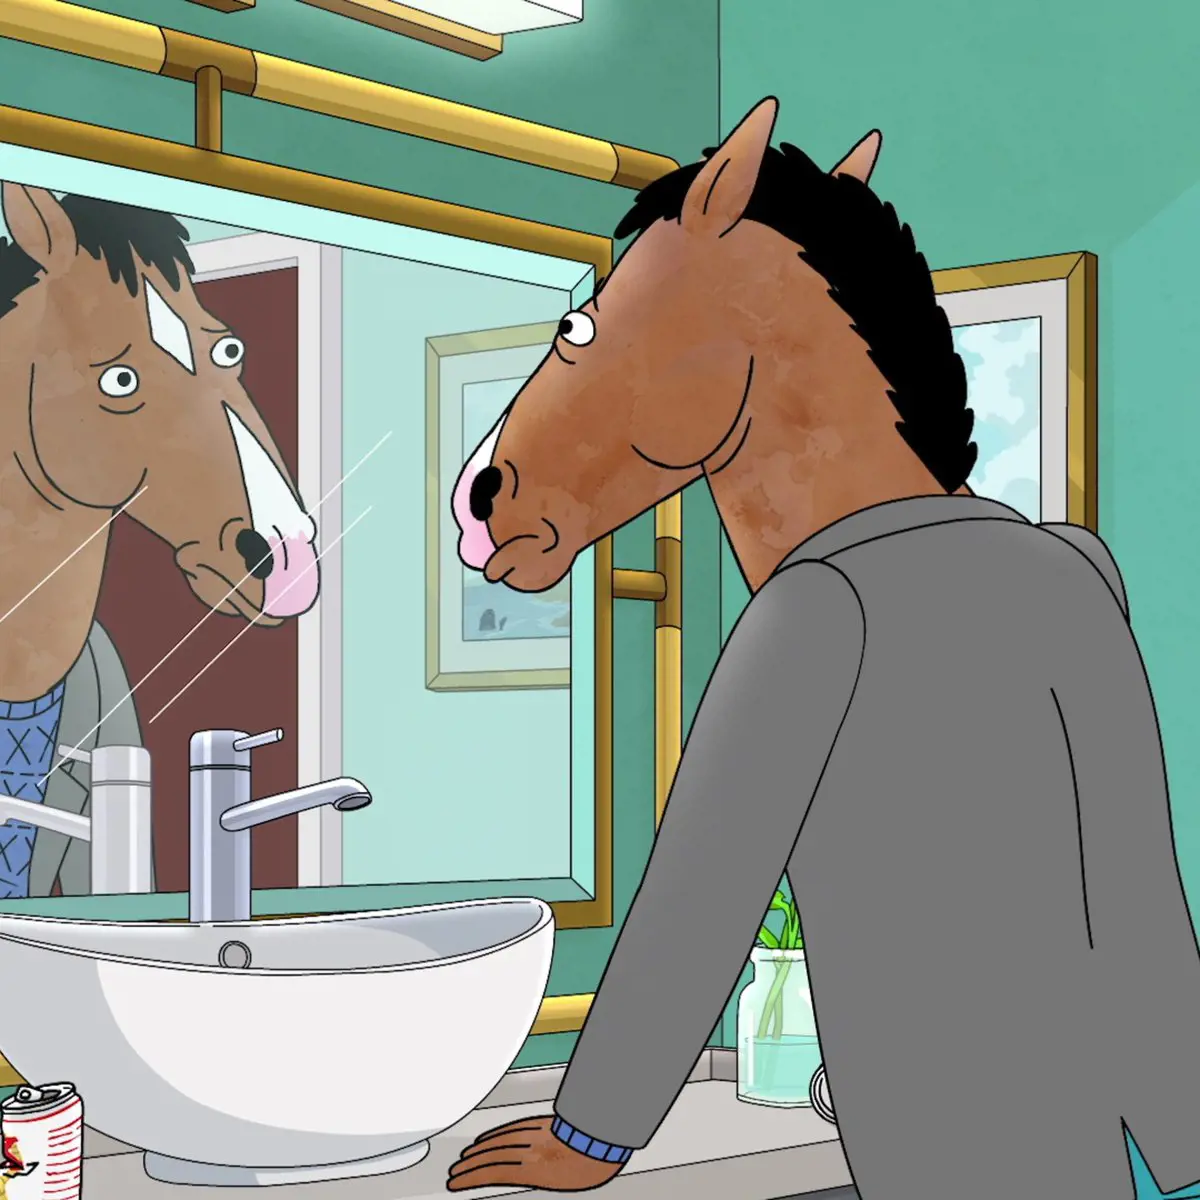 It tells the story of BoJack and his struggles as a washed-up actor.